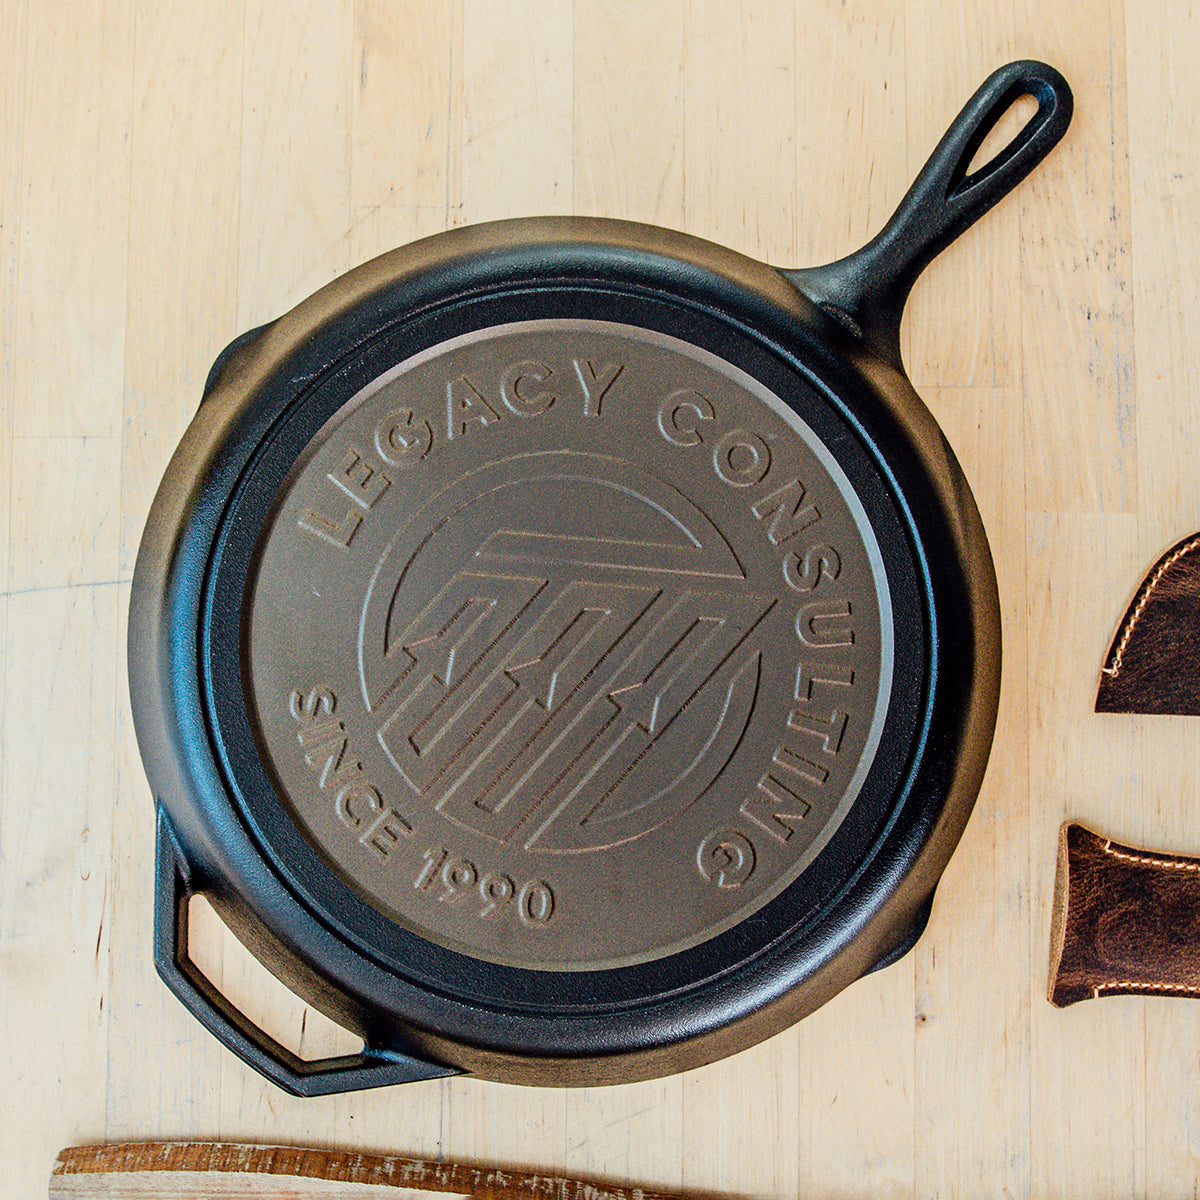 Branded Cast Iron Skillet on Table